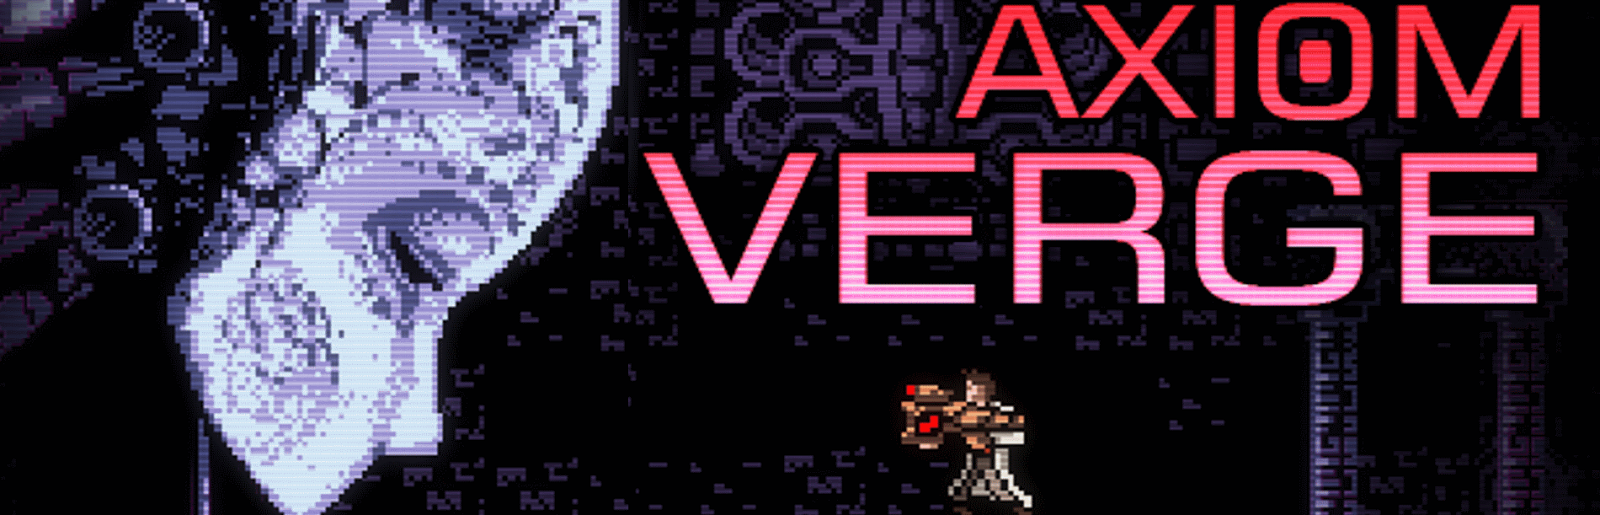 Review: Axiom Verge (PS4)